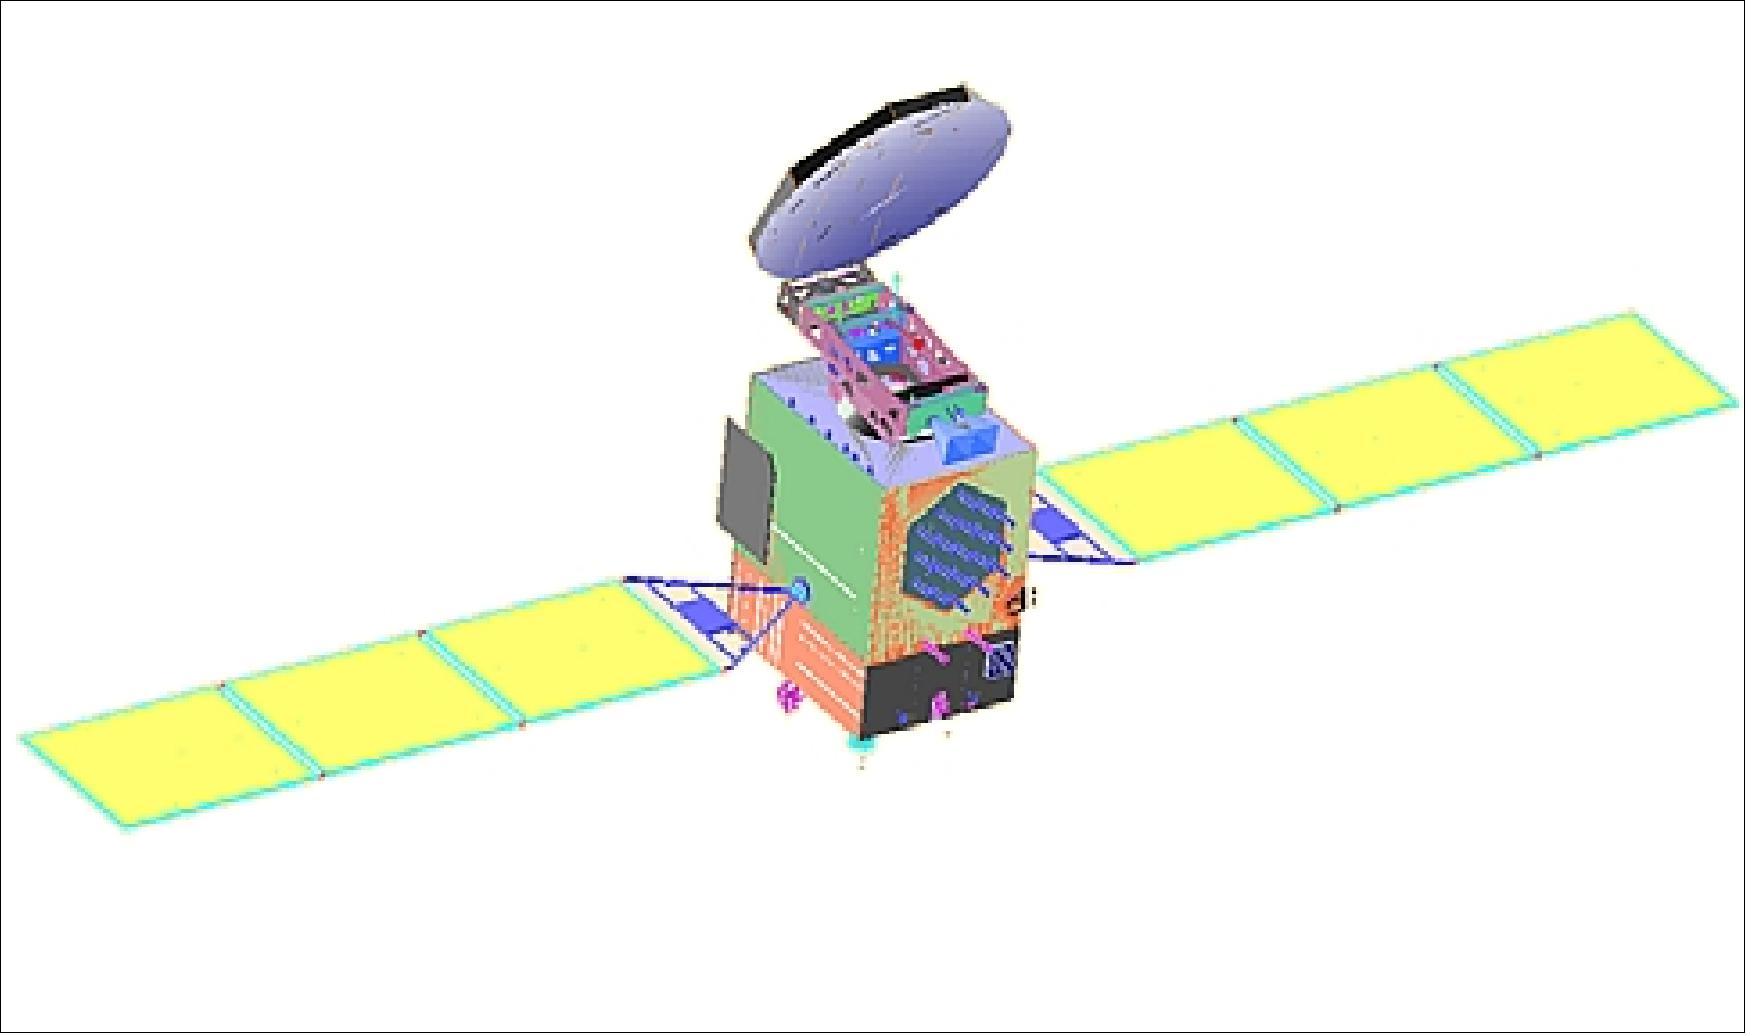 Figure 4: Illustration of the Compass-GEO spacecraft (image credit: DFH/CAST)